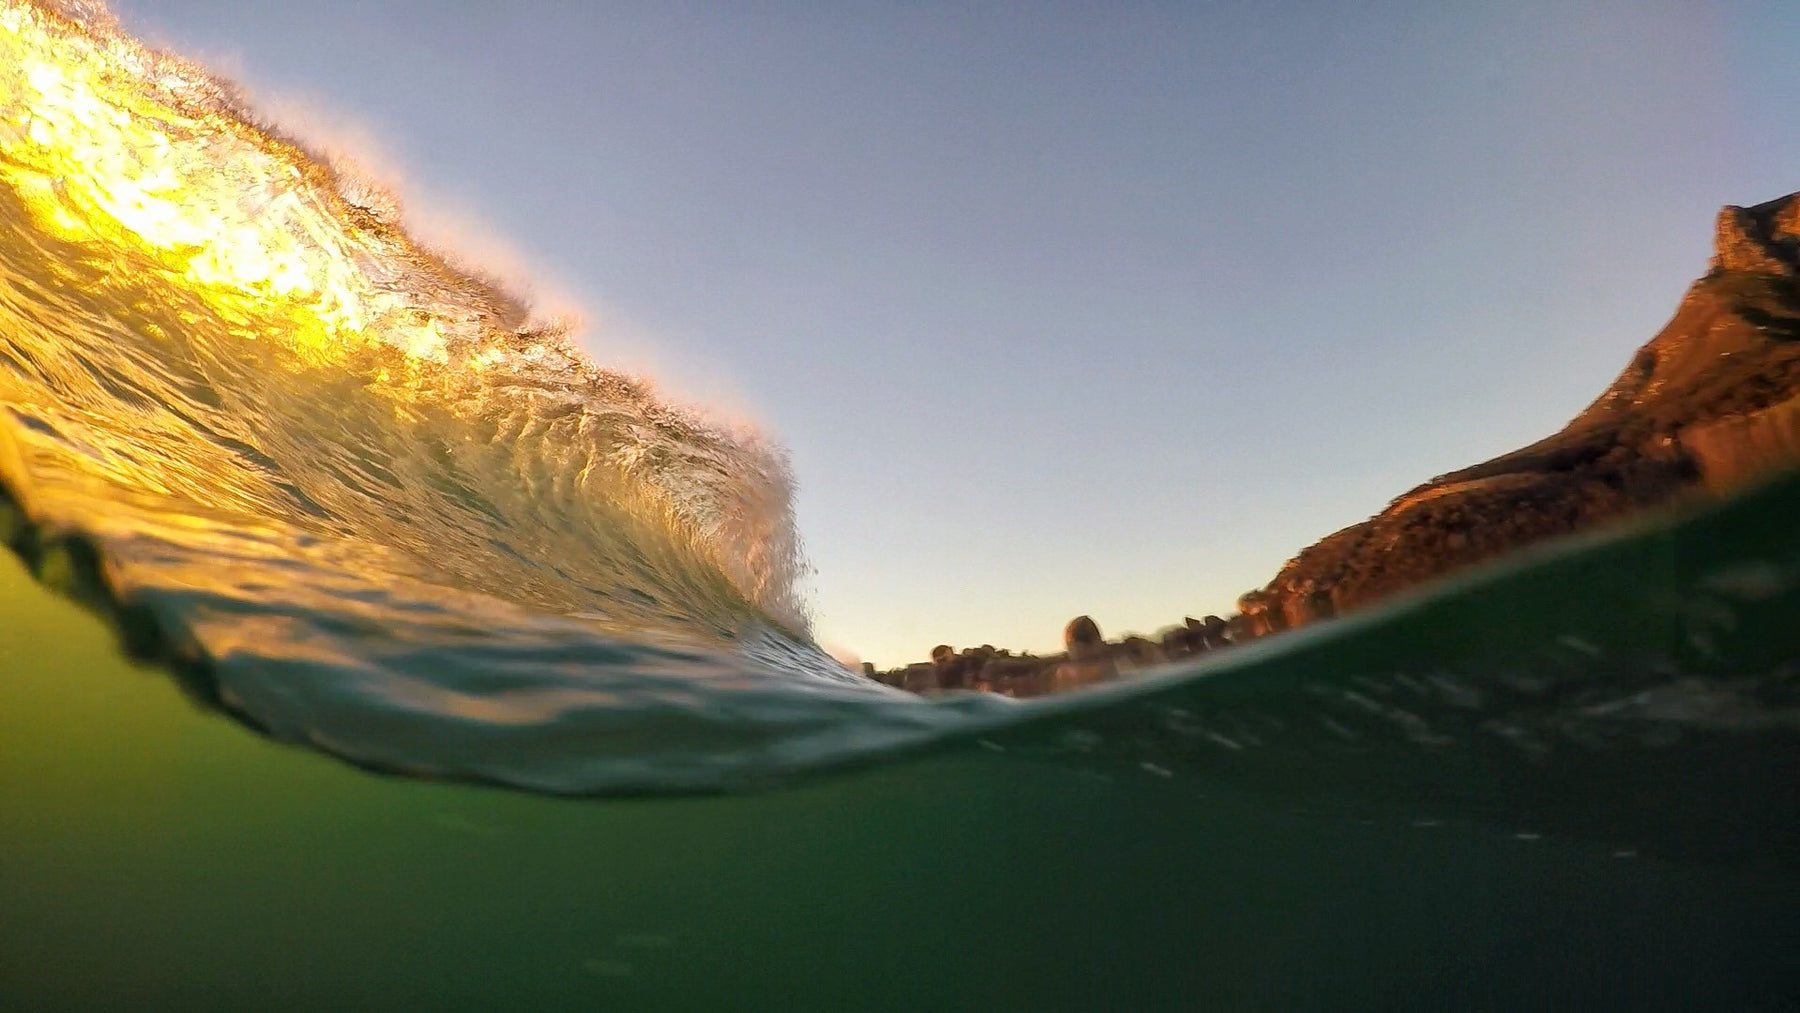 WILL THE BEST SURF PHOTOS BE TAKEN WITH A PHONE 2023